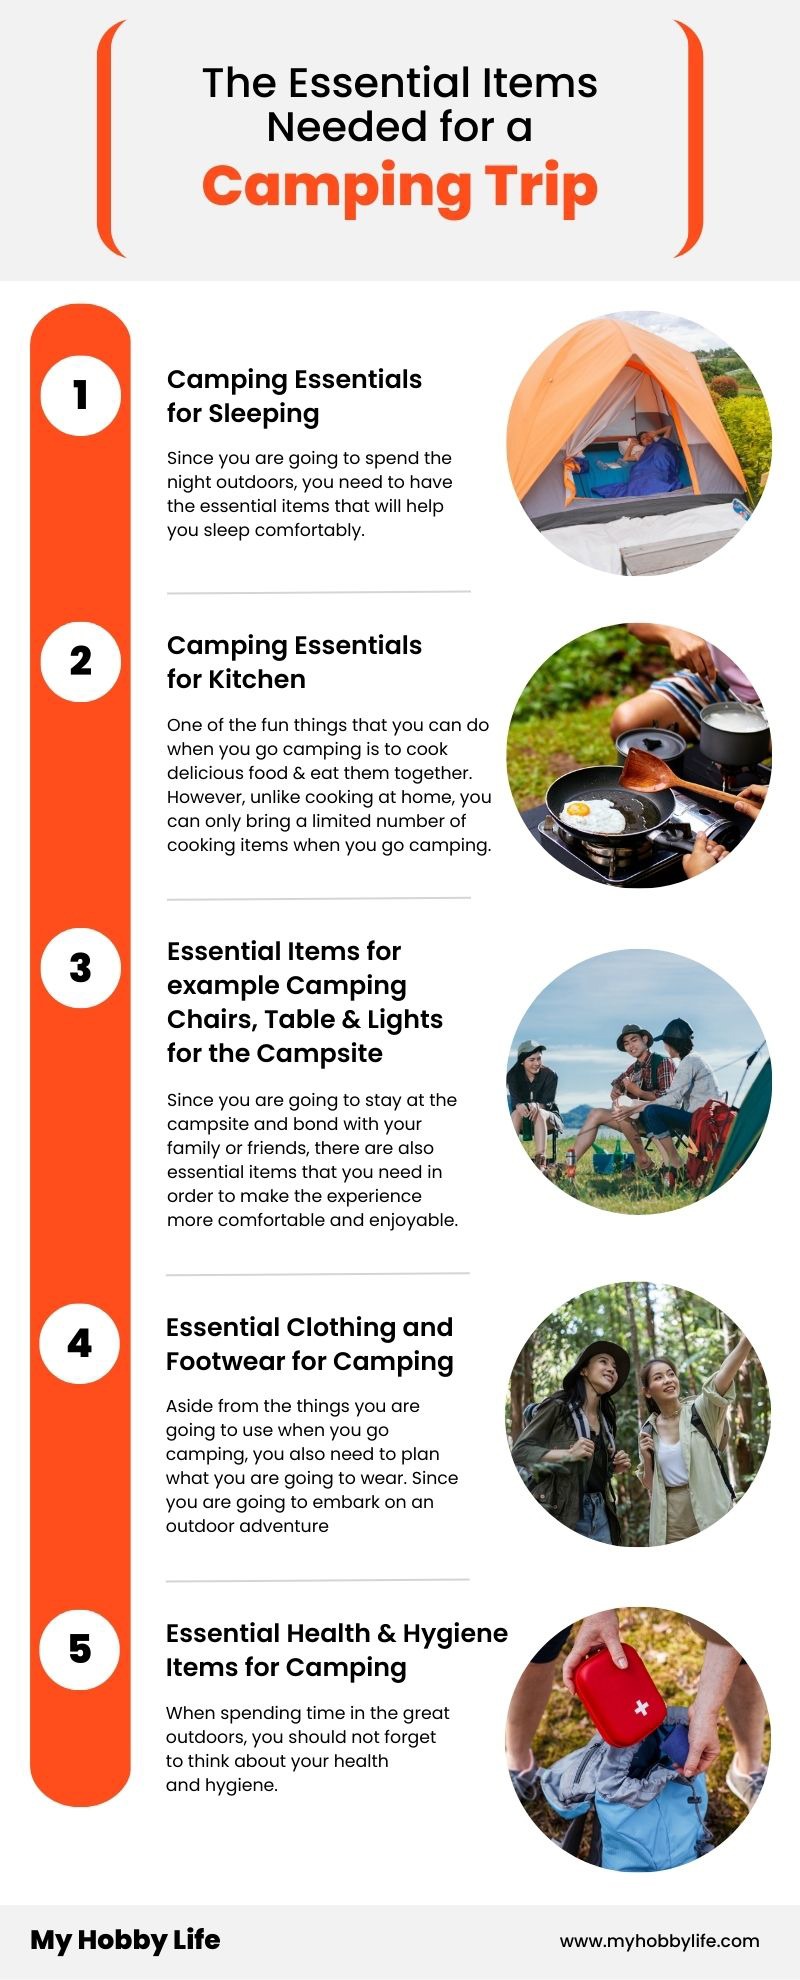 Safety Precautions to Take When Camping